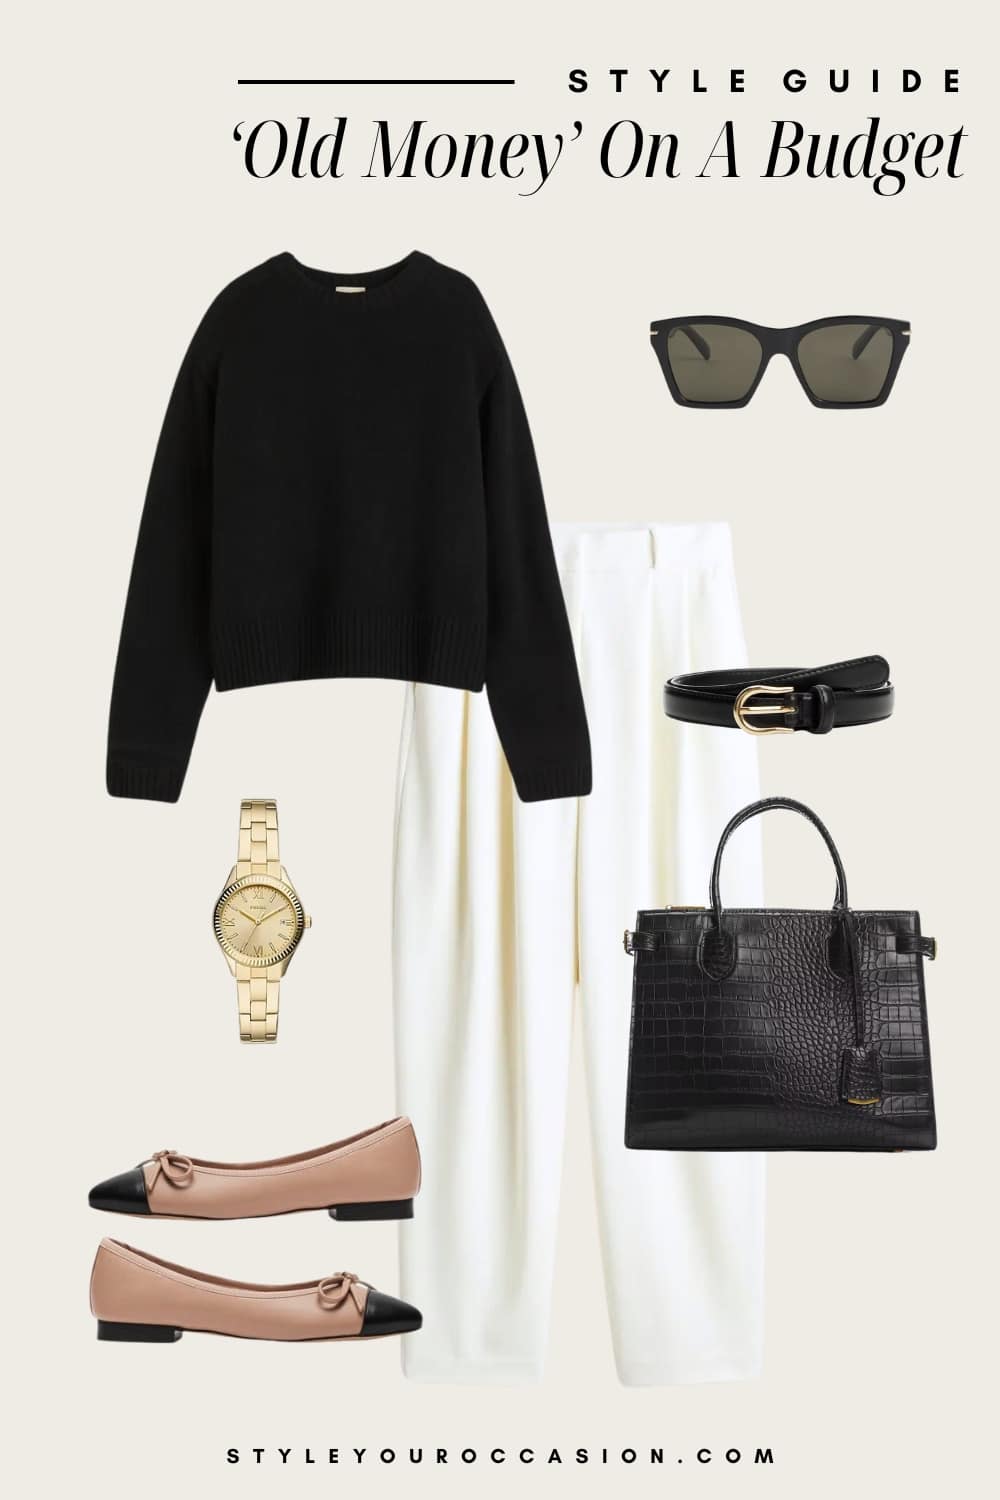 an image board of an old money outfit featuring pleated white pants, a black crewneck sweater, cap toe black and tan ballet flats, and black and gold accessories